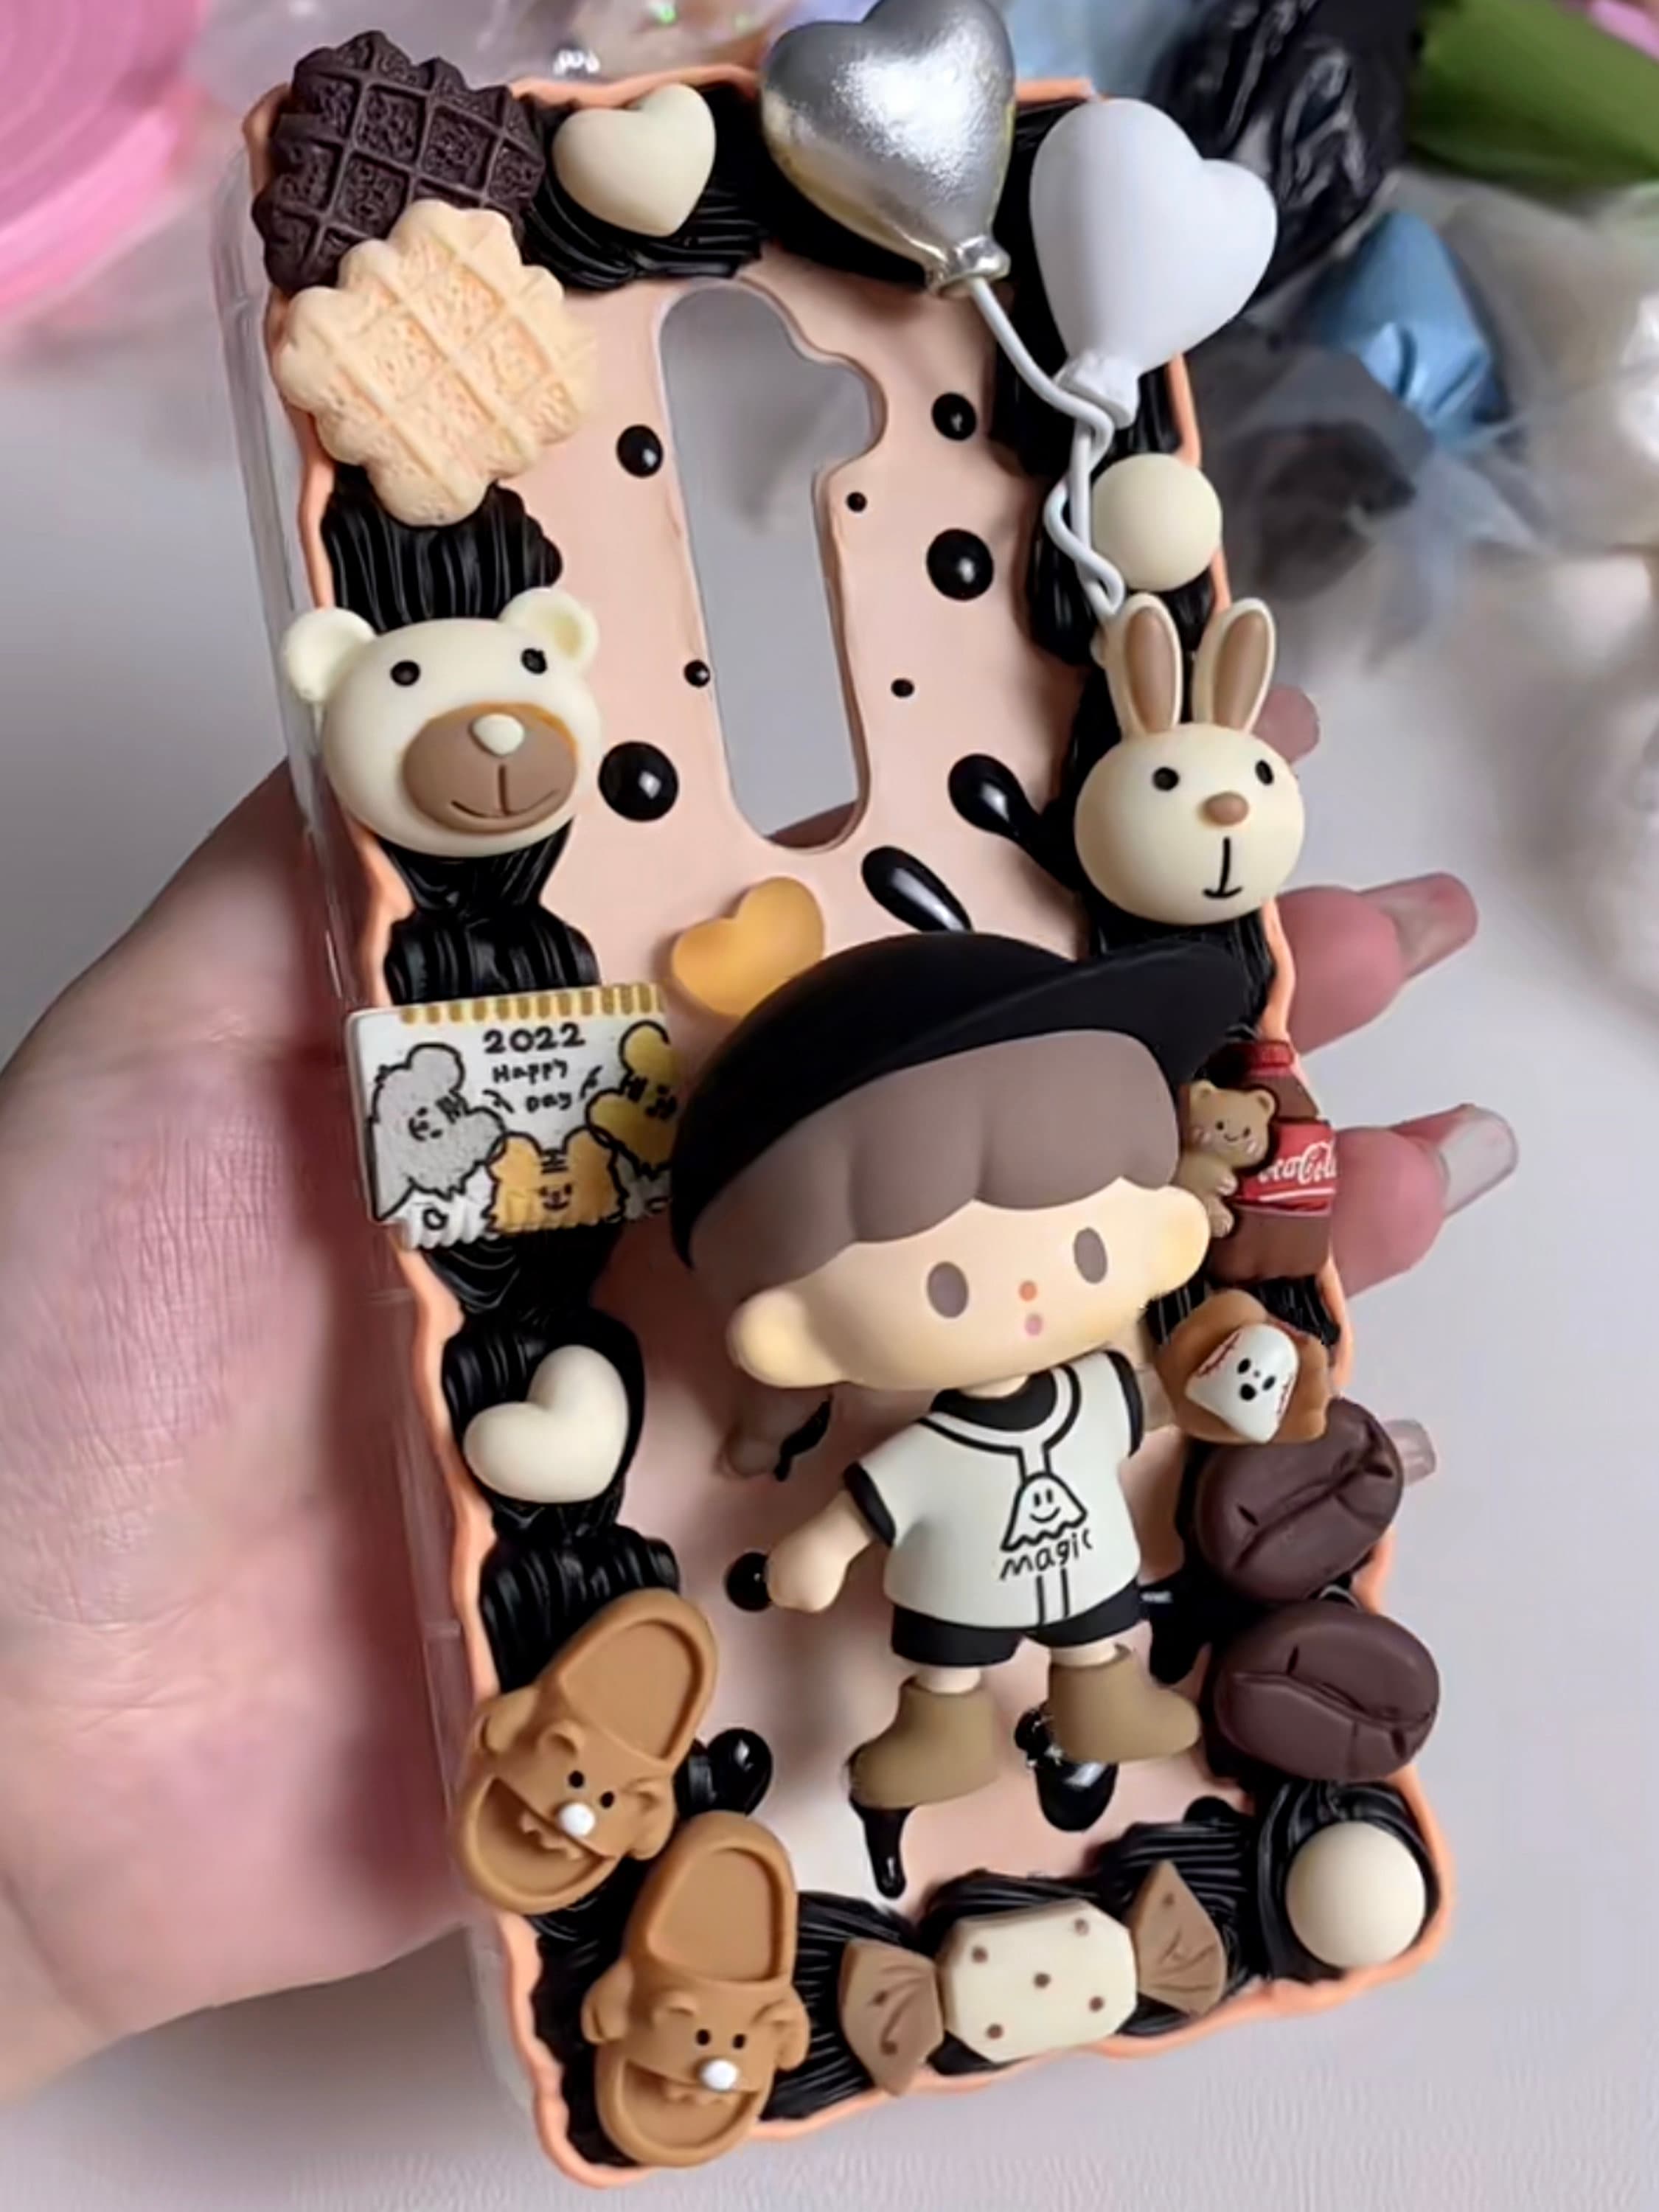 i made a decoden phone case with our red burny girl! ♡ : r/KleeMains